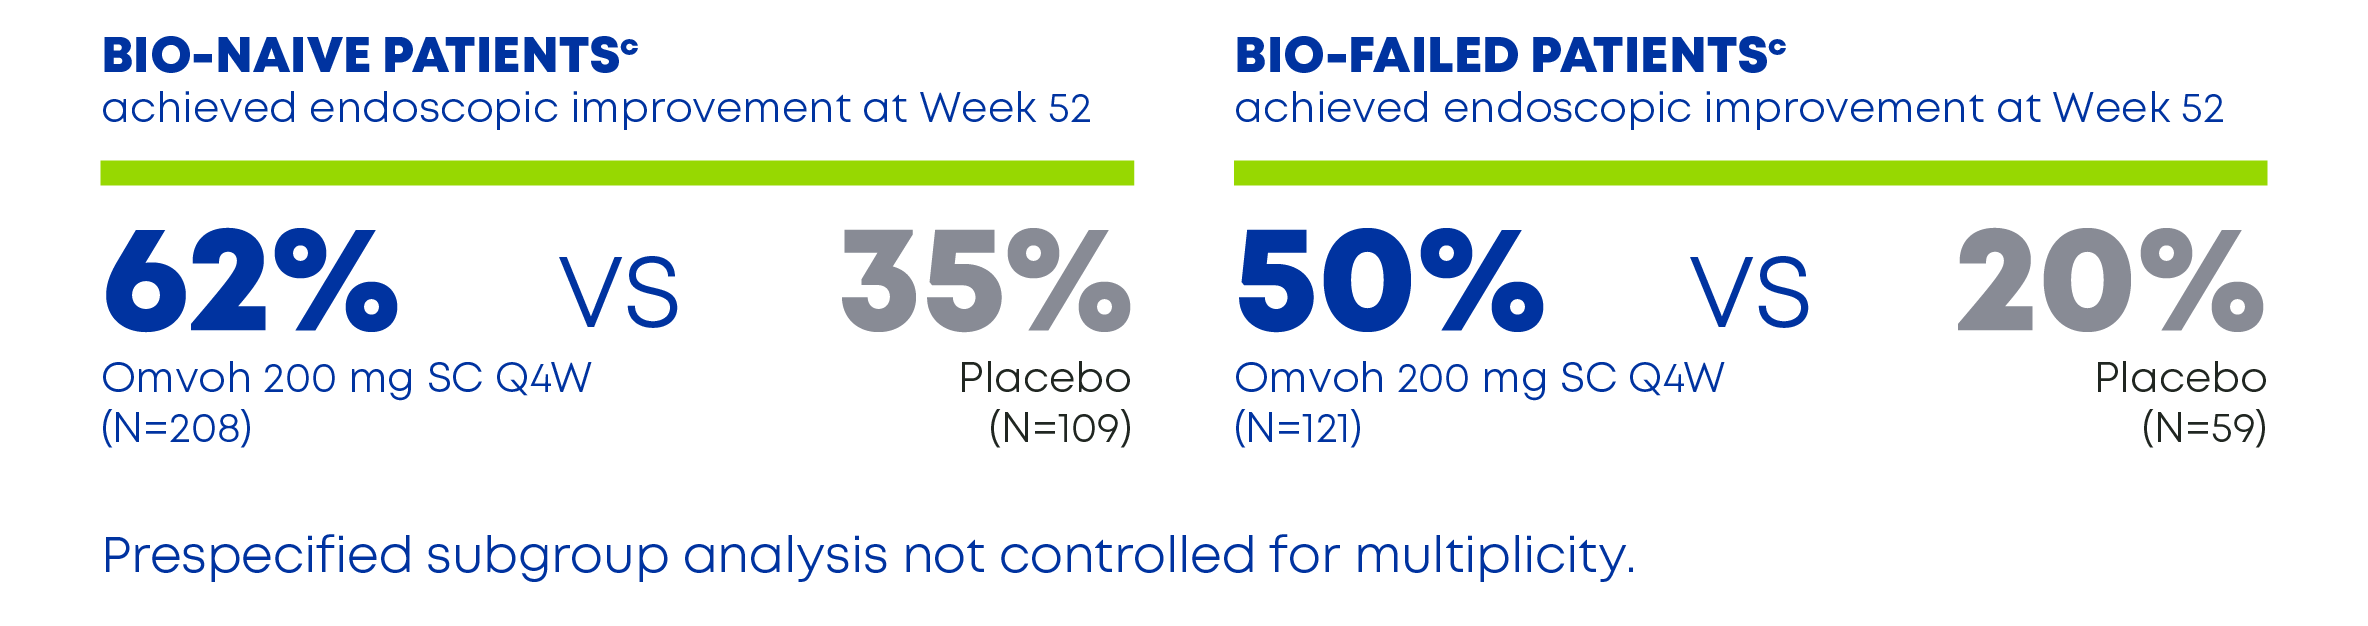 Bio-naive and Bio-failed Patients Achieved Endoscopic Improvement at Week 52